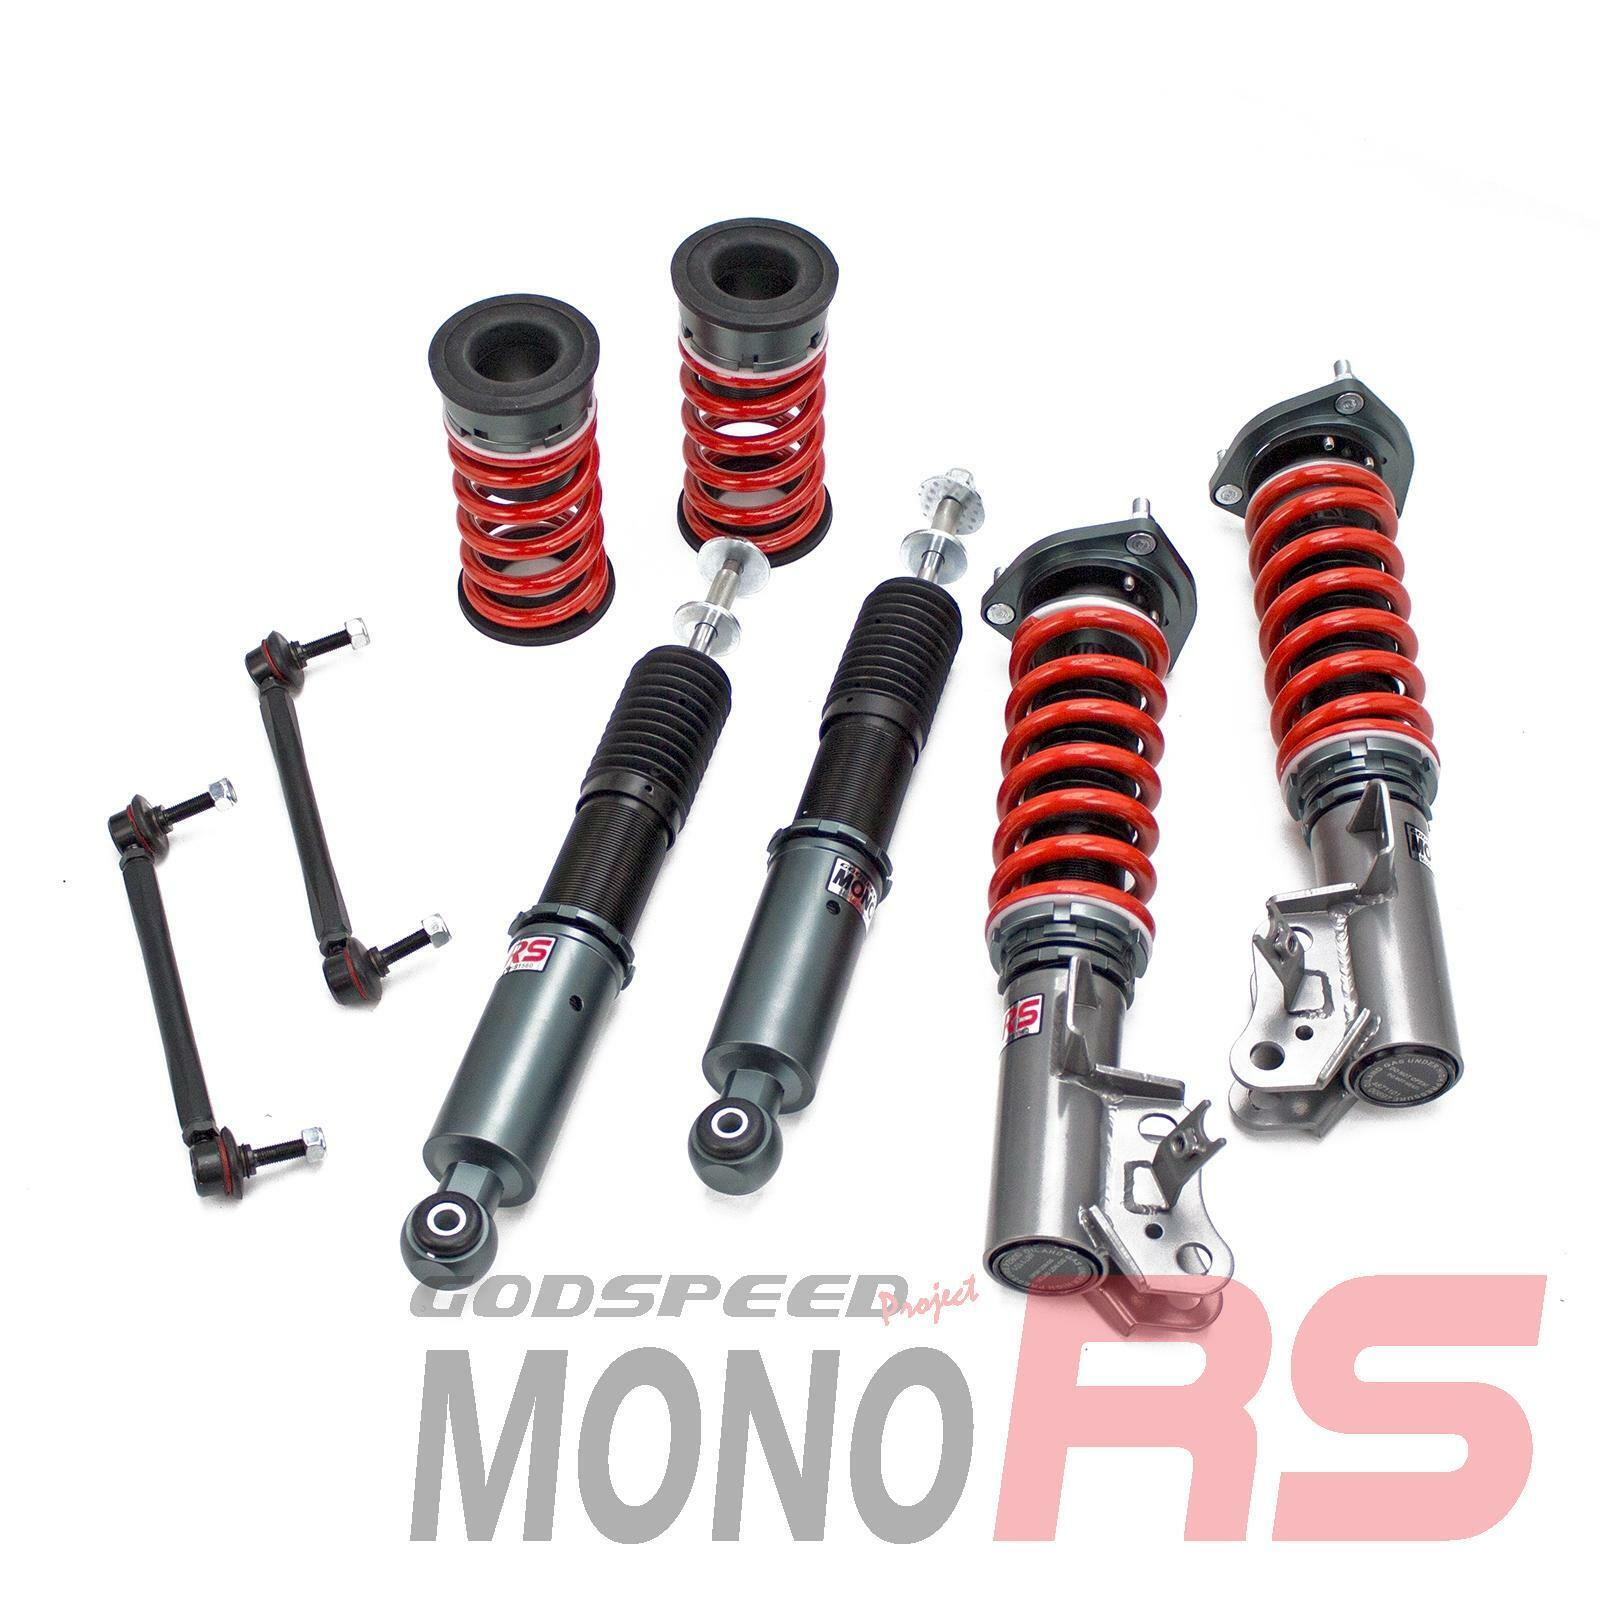 Godspeed(MRS1560-B) MonoRS Coilovers for Honda Civic 12-15 LX/EX Fully Adjust...